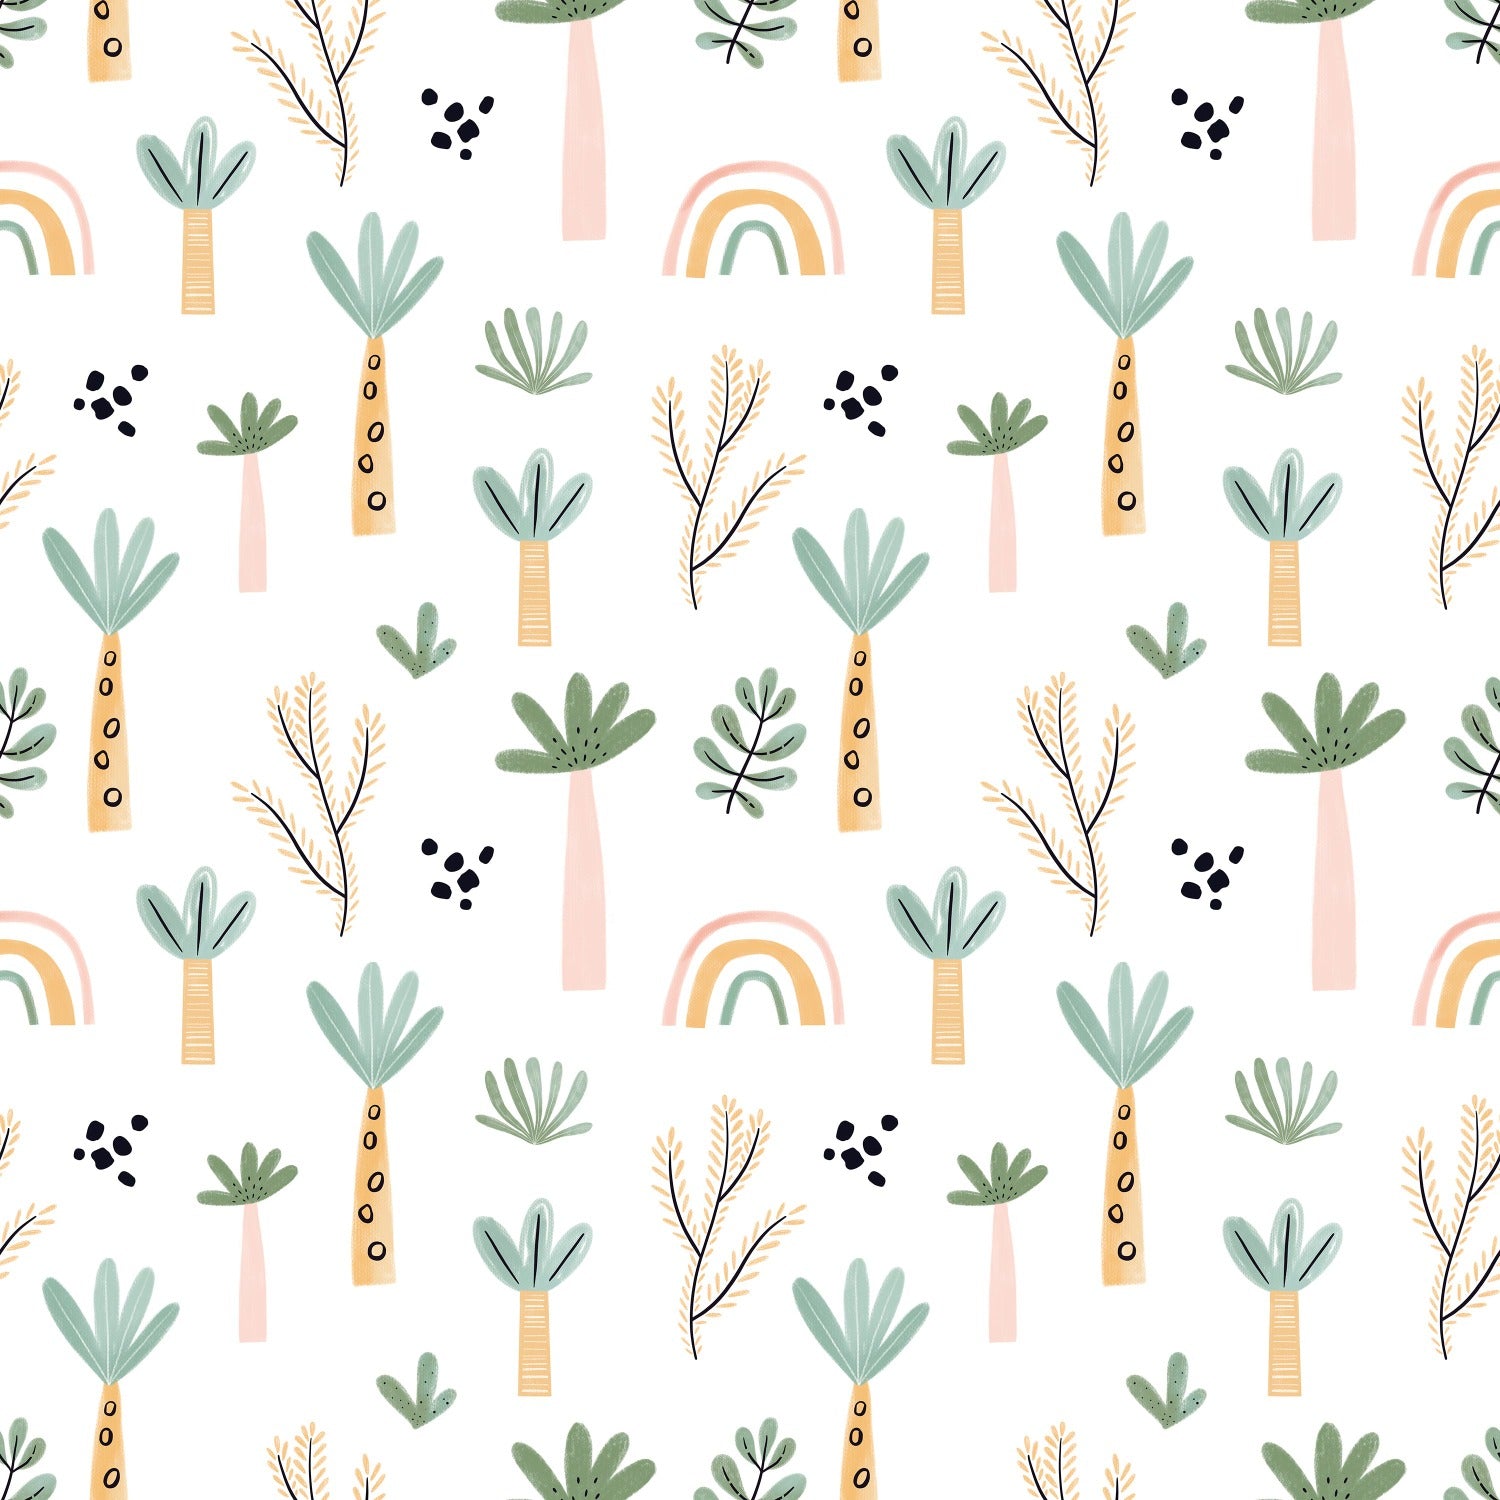 A playful and charming wallpaper pattern from the Tropical Kids Room Wallpaper collection, featuring whimsical illustrations of trees, leaves, and abstract shapes in a soft pastel color palette of greens, yellows, pinks, and black dots on a clean white background.